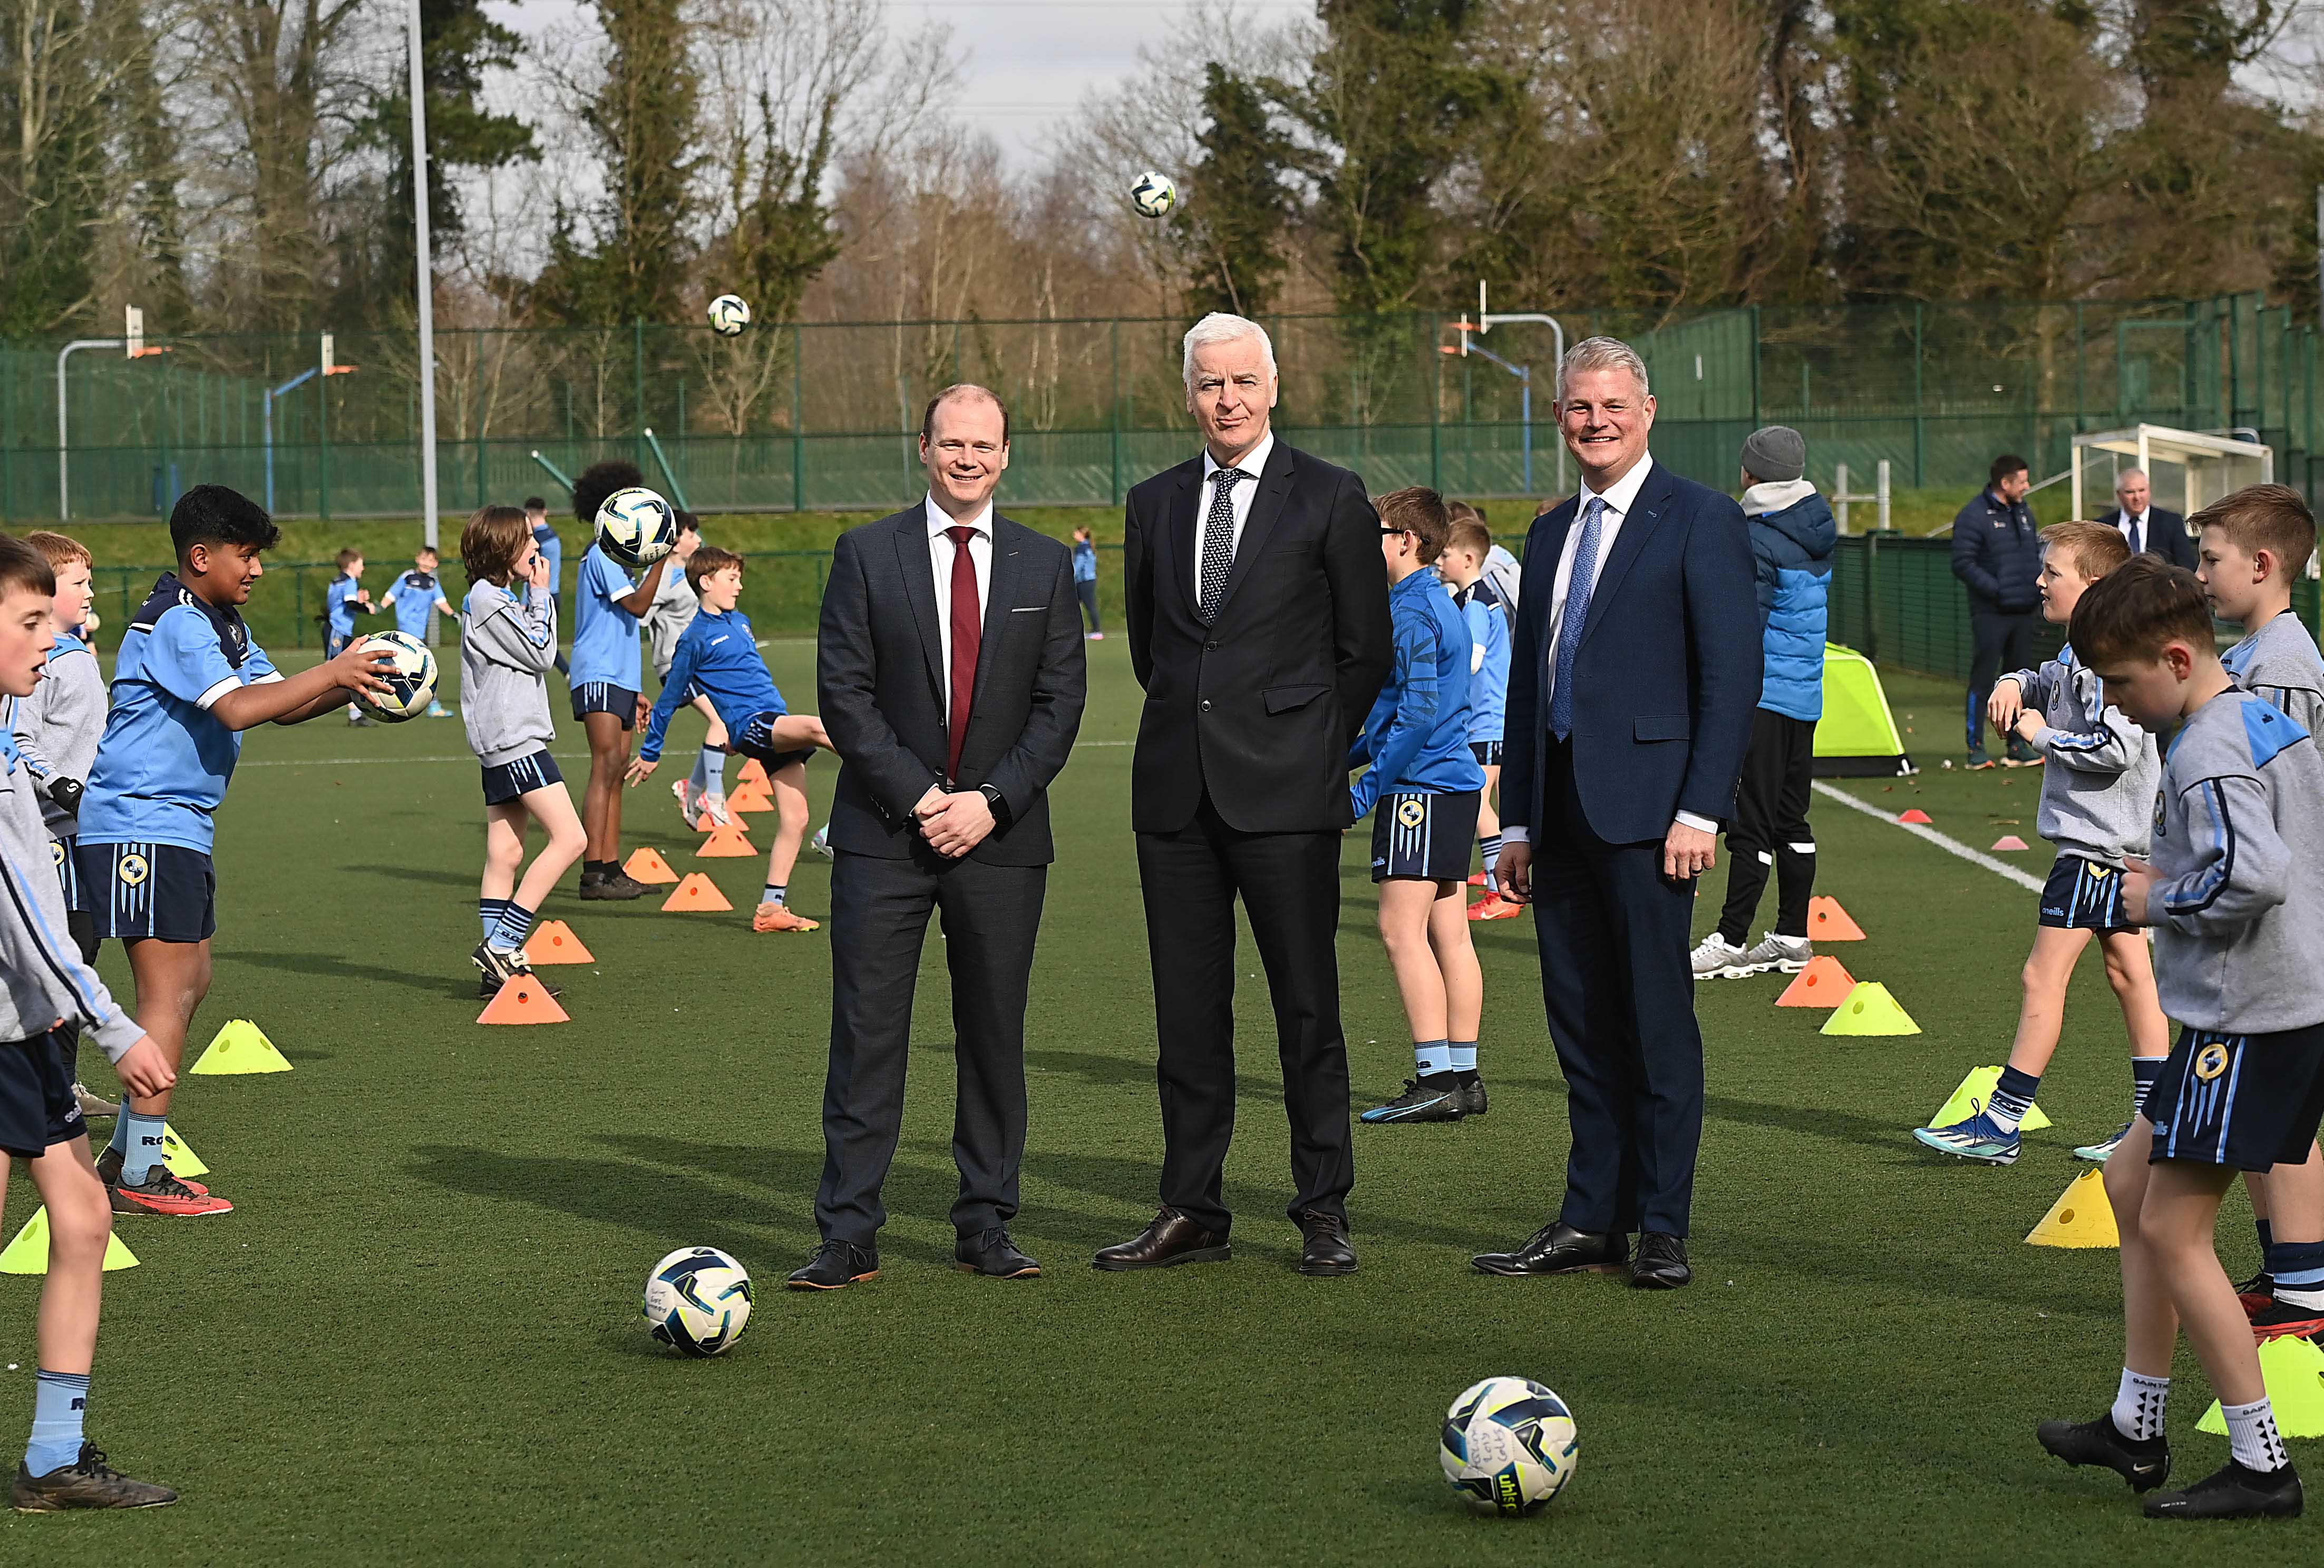 Minister Lyons hosts the visit of the British Sports Minister